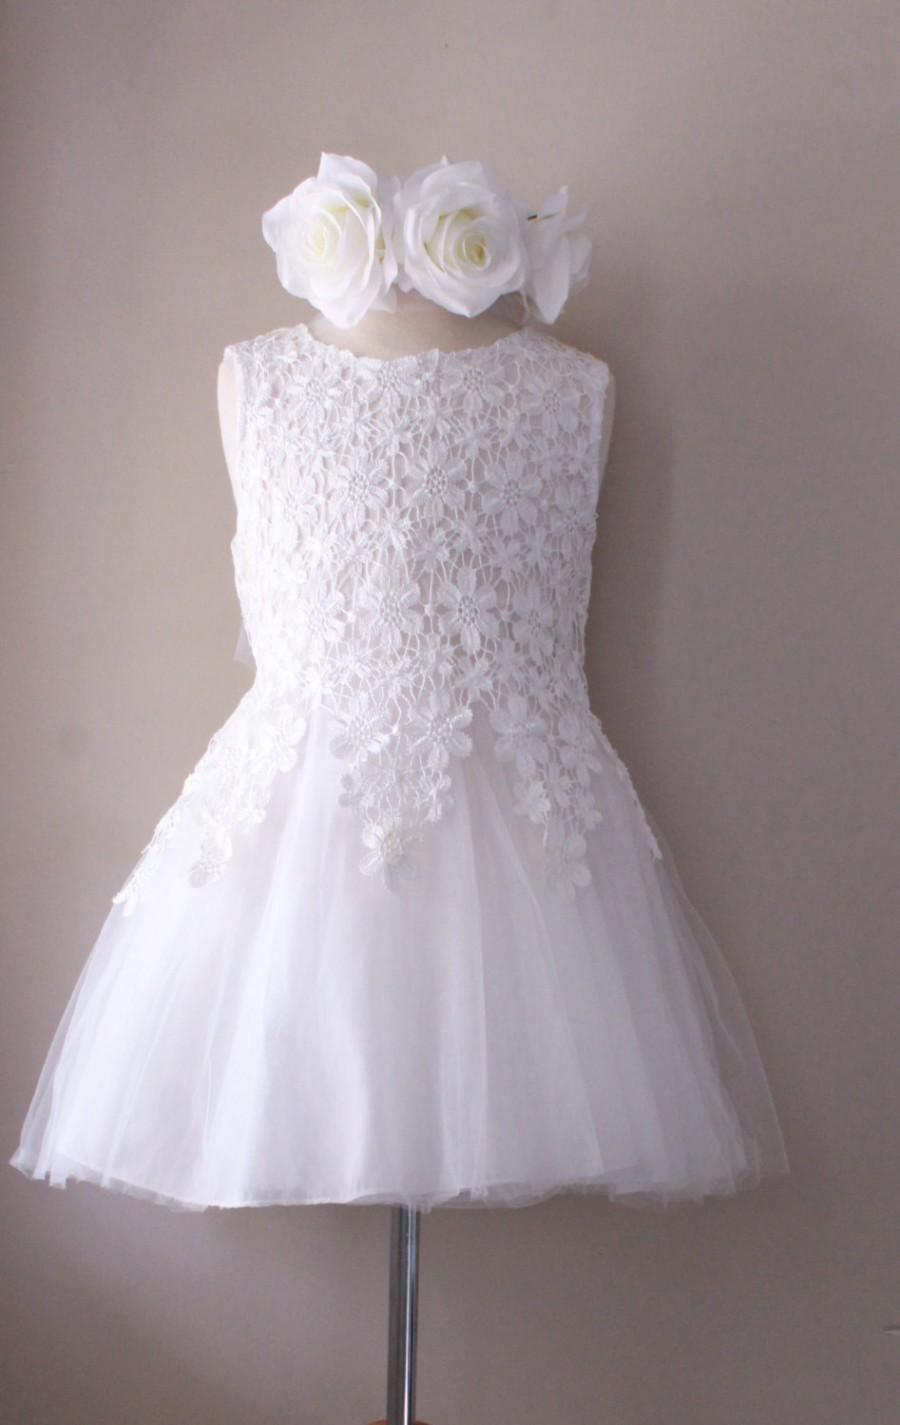 Mariage - White Flower Girl Dress- White Lace Flower Girl Dress- Couture Flower Girl Dress- Birthday Lace Girl Dress